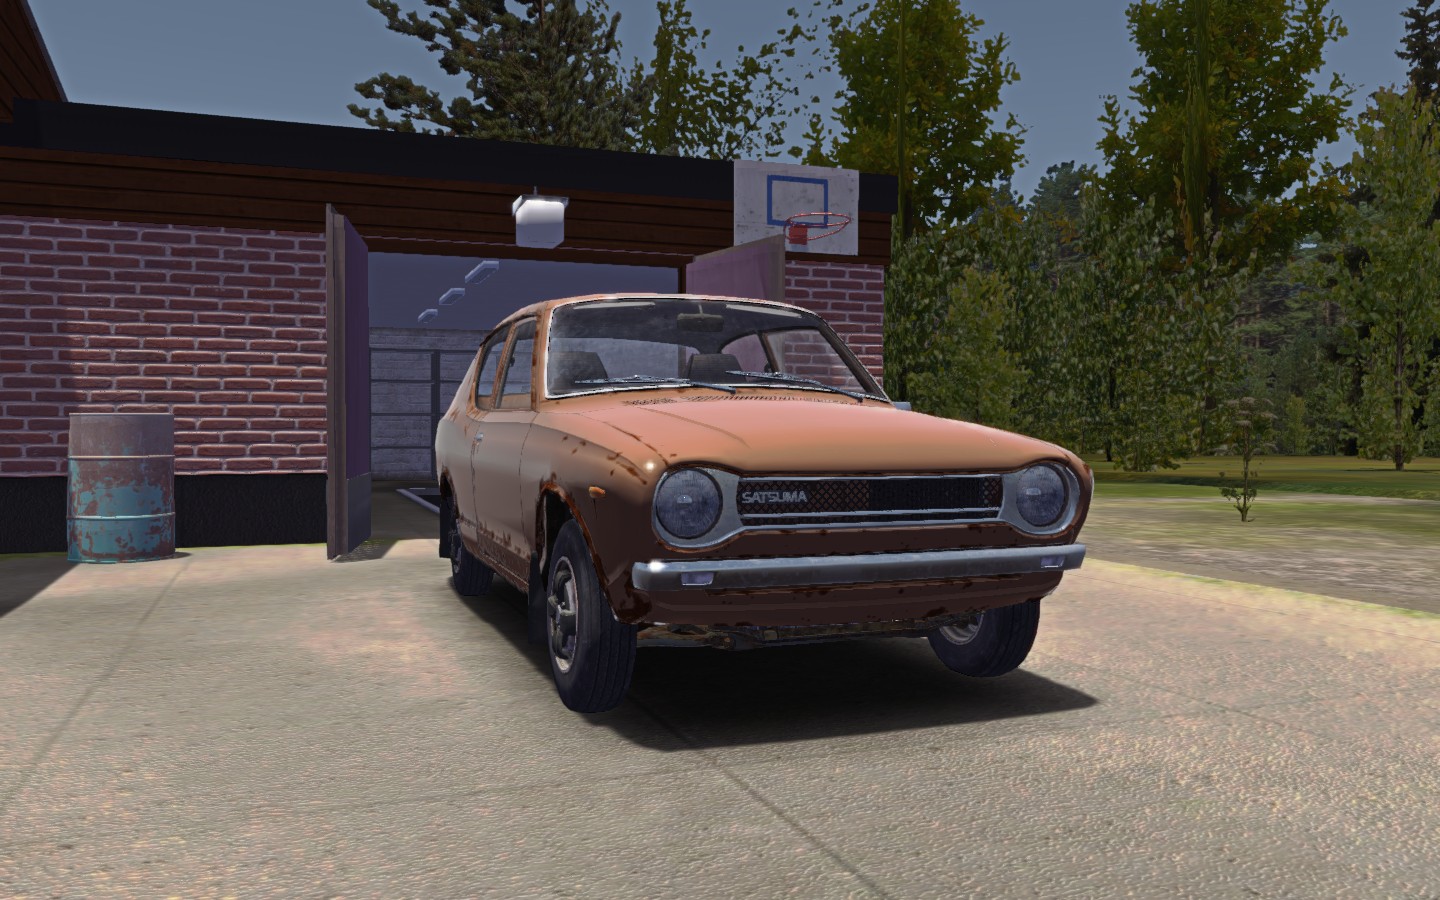 My Summer Car: SaveGame (full stock. 3k marks, some food, home brew)